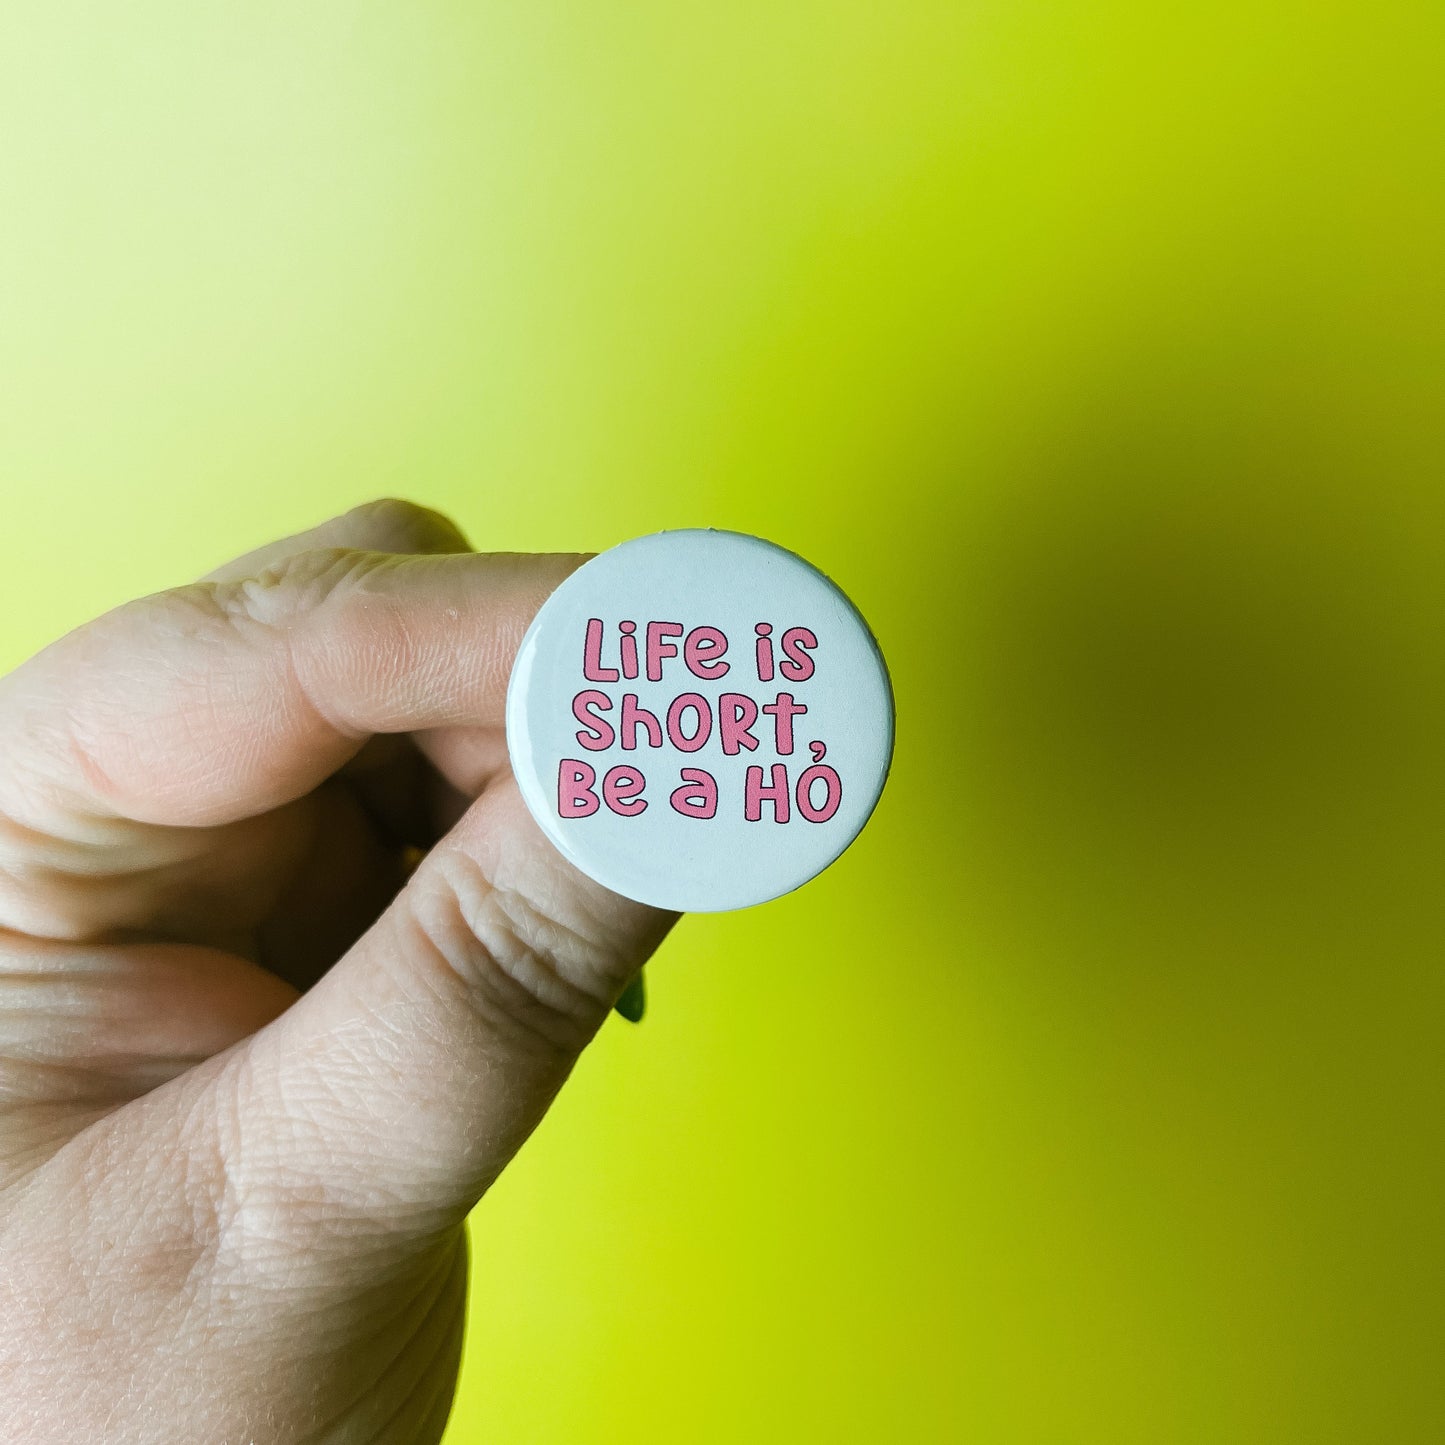 Life is Short Be A Hoe - Button